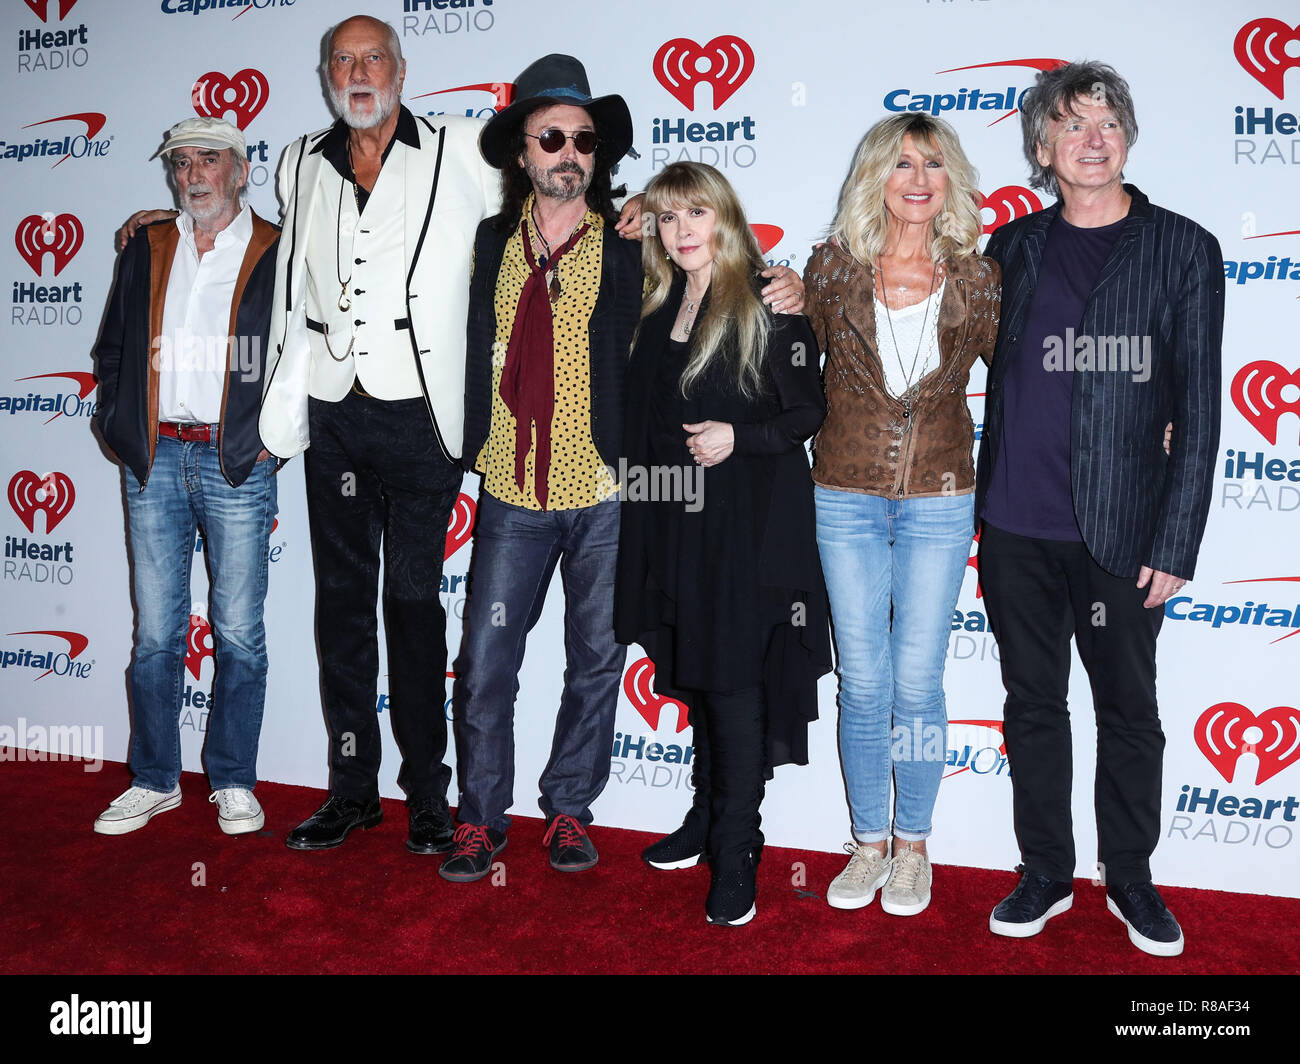 LAS VEGAS, NV, USA - SEPTEMBER 21: John McVie, Mick Fleetwood, Mike Campbell, Stevie Nicks, Christine McVie, Neil Finn, Fleetwood Mac in the press room during the 2018 iHeartRadio Music Festival - Night 1 held at T-Mobile Arena on September 21, 2018 in Las Vegas, Nevada, United States. (Photo by Xavier Collin/Image Press Agency) Stock Photo